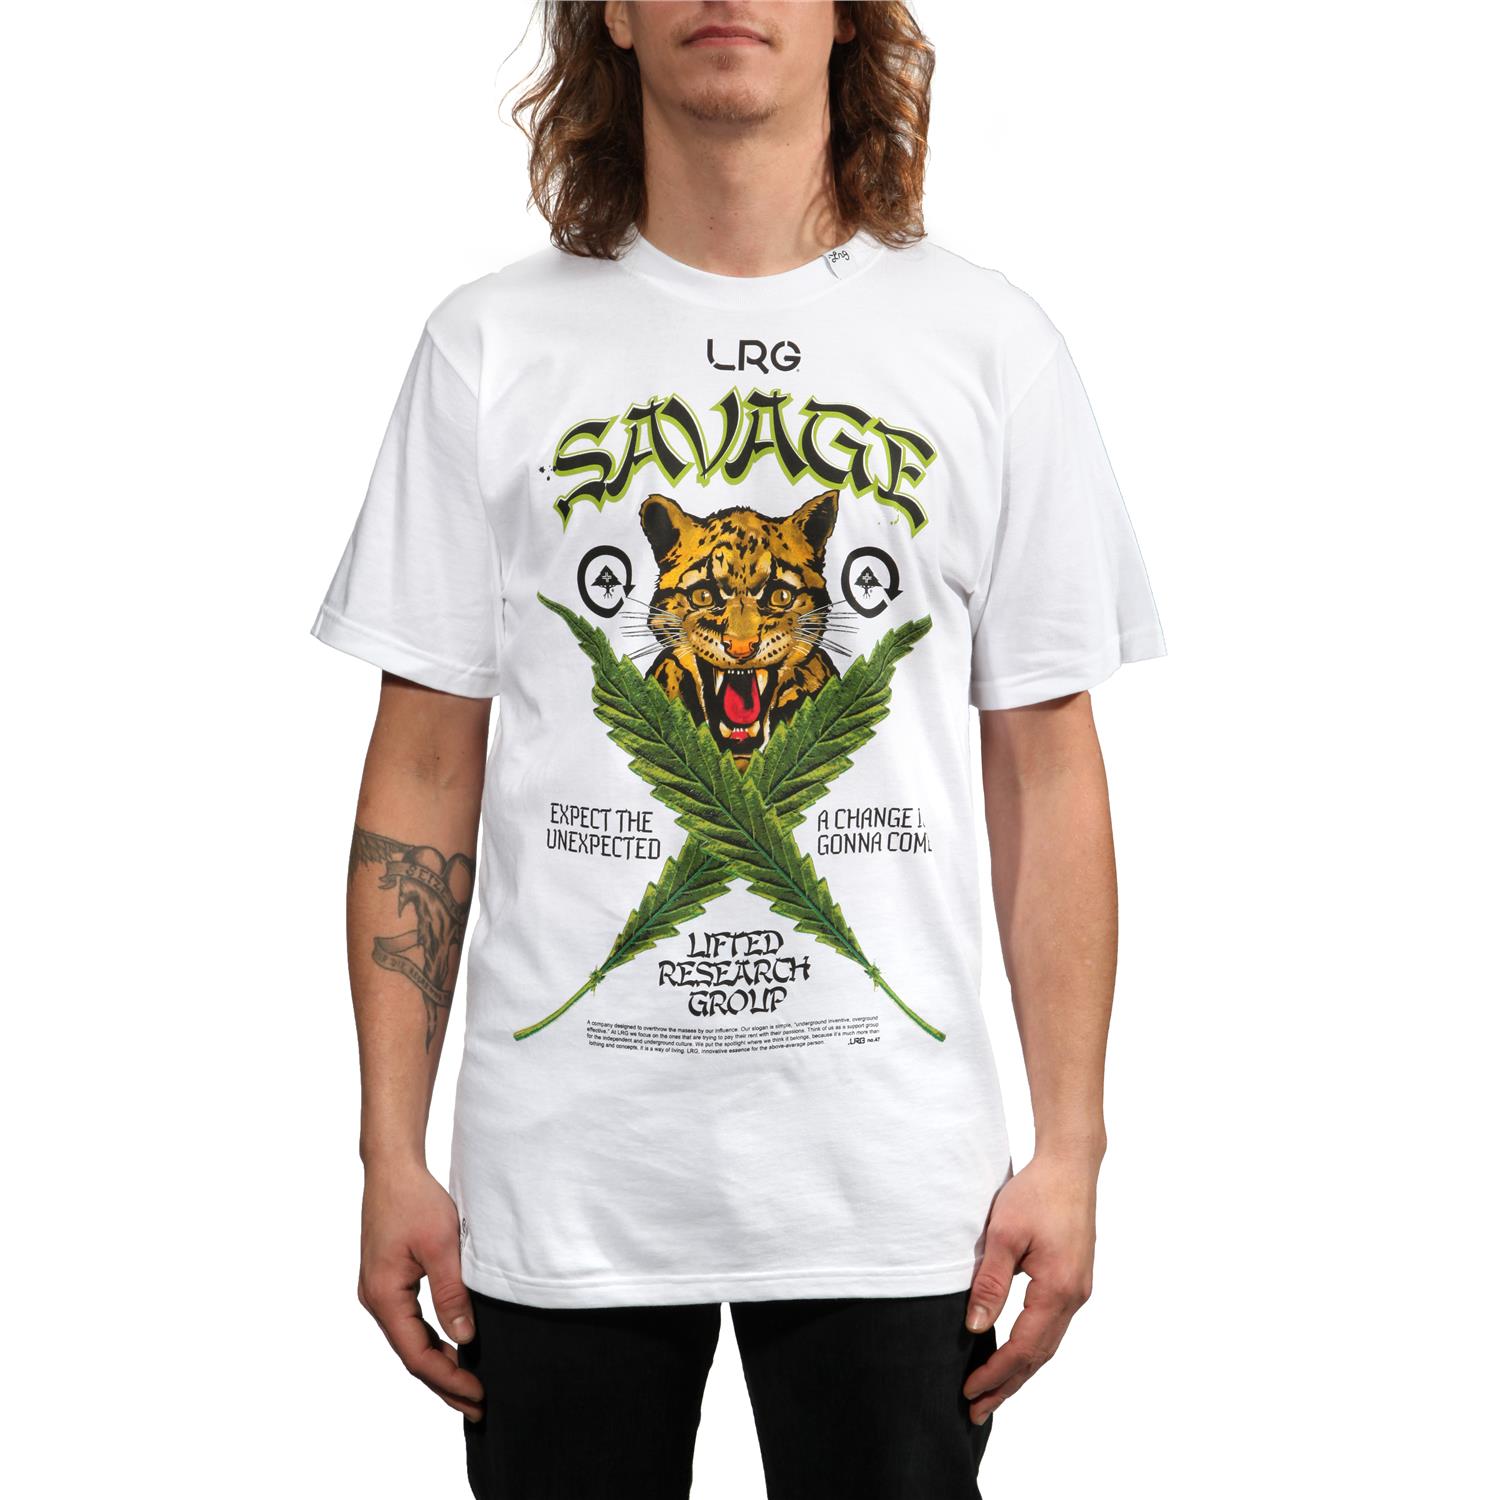 lrg savage cats t shirt white front